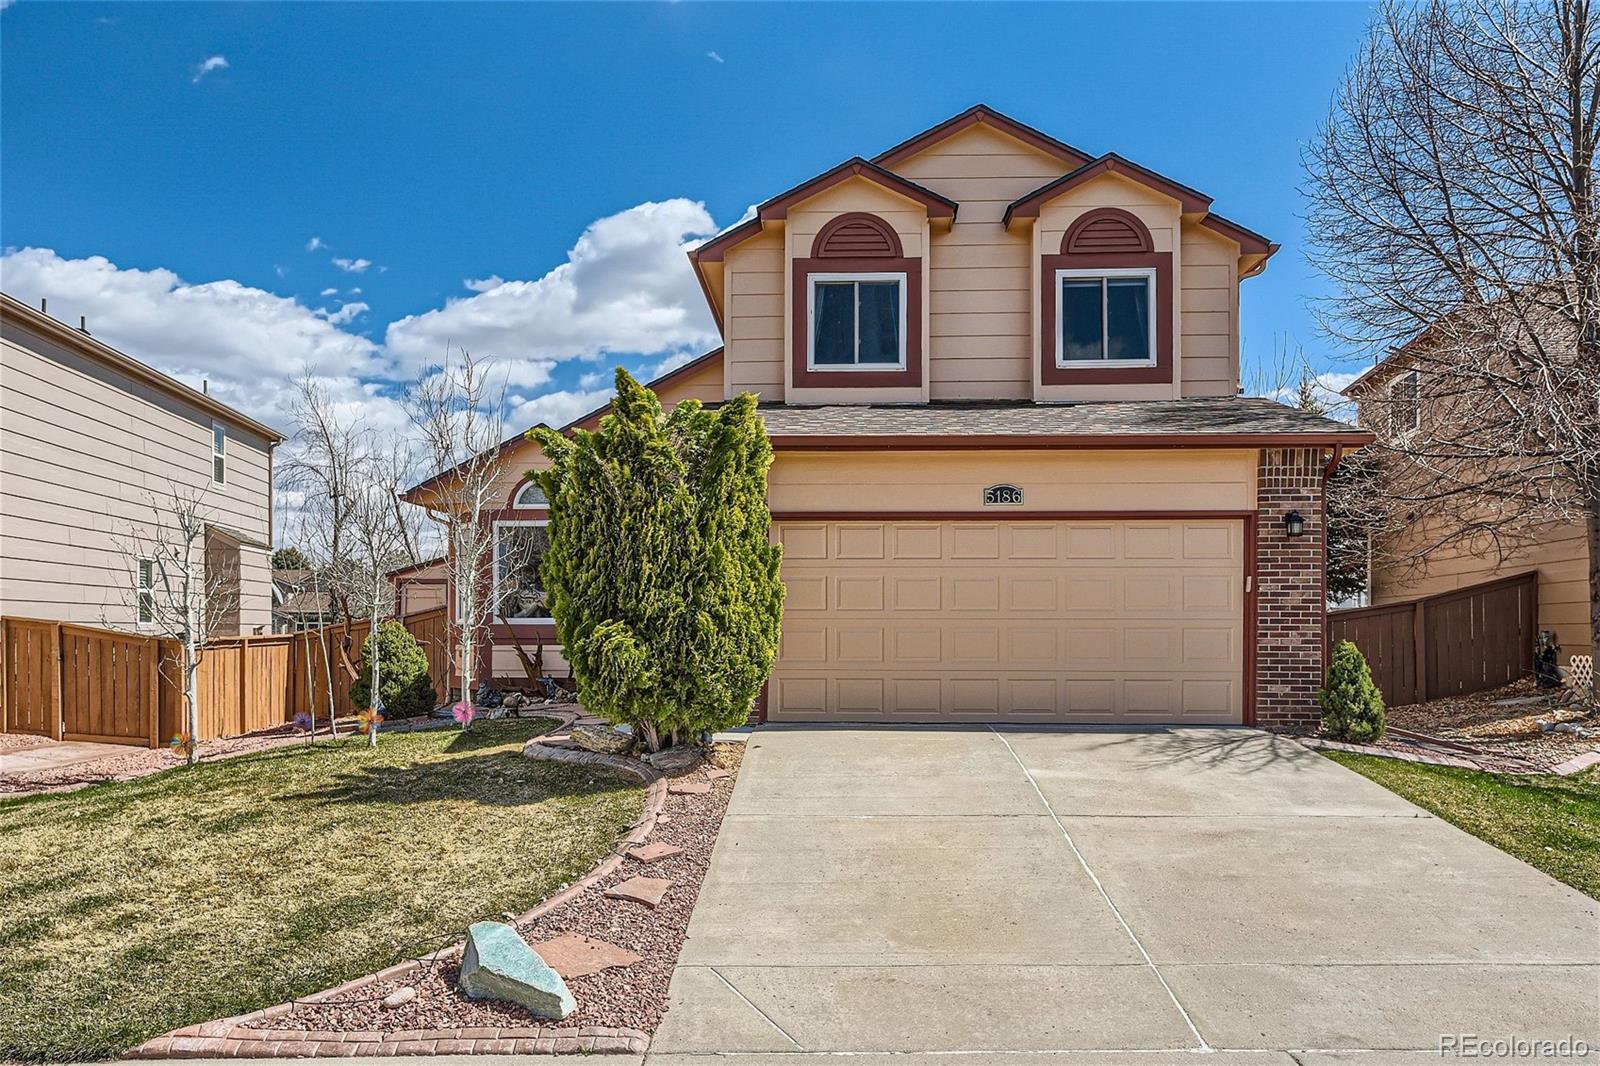 5186  Weeping Willow Circle, highlands ranch MLS: 5175656 Beds: 5 Baths: 3 Price: $650,000